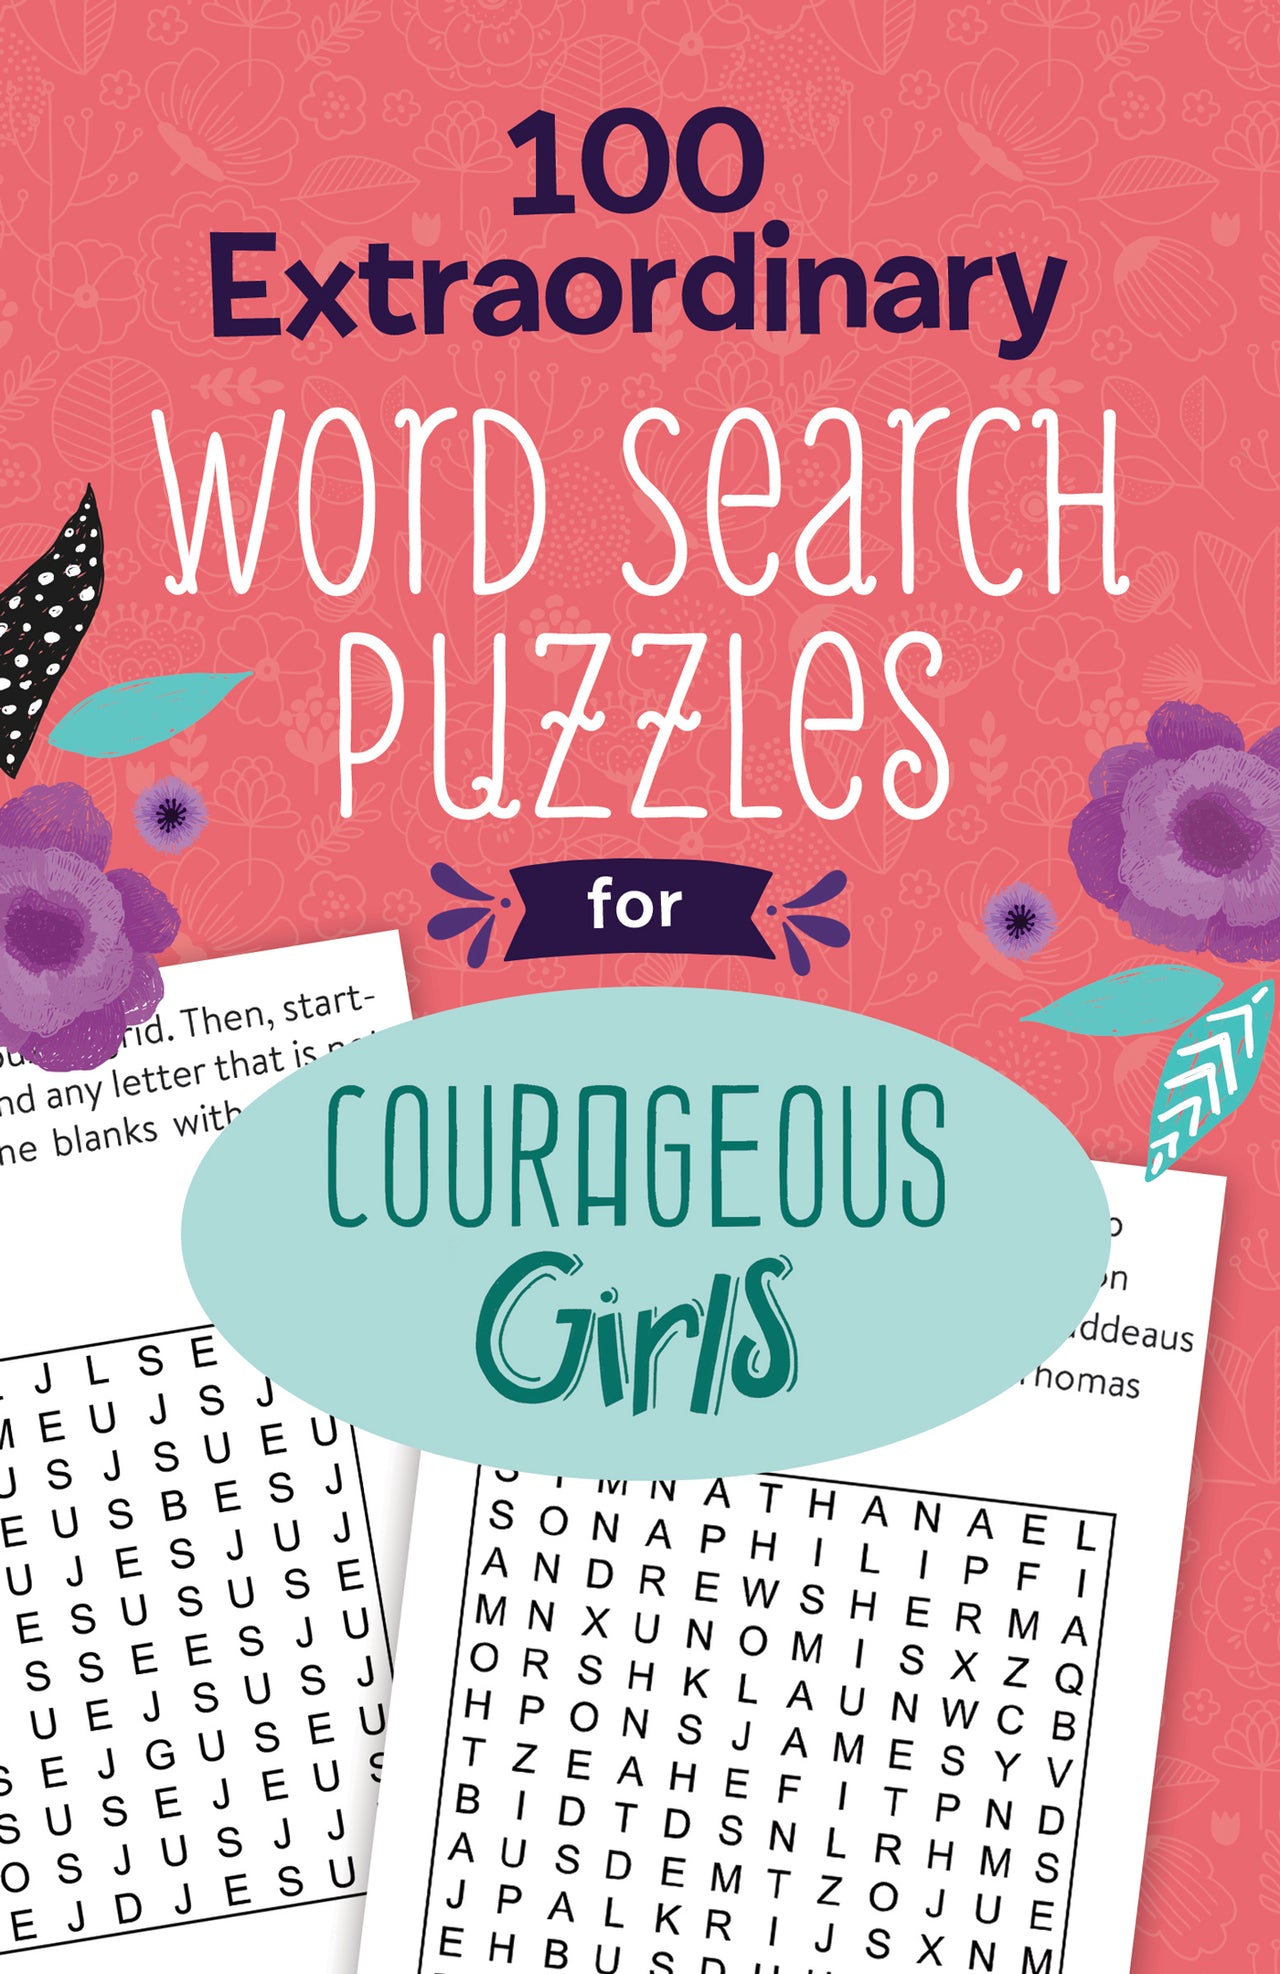 100 Extraordinary Word Search Puzzles for Courageous Girls - Mercantile Mountain